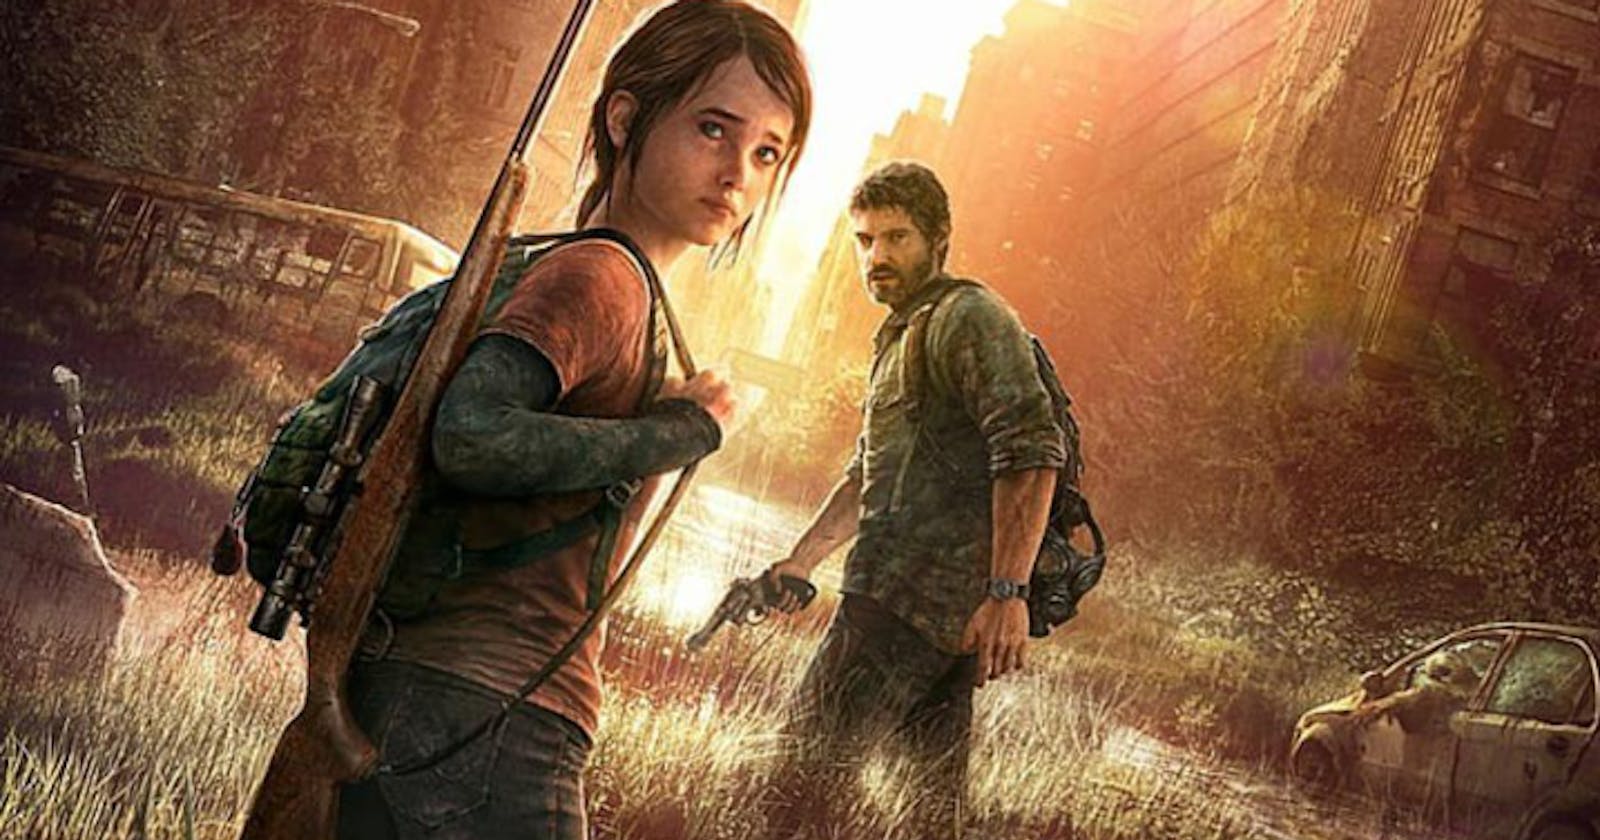 The creators of The Last of Us respond to reactions from fans